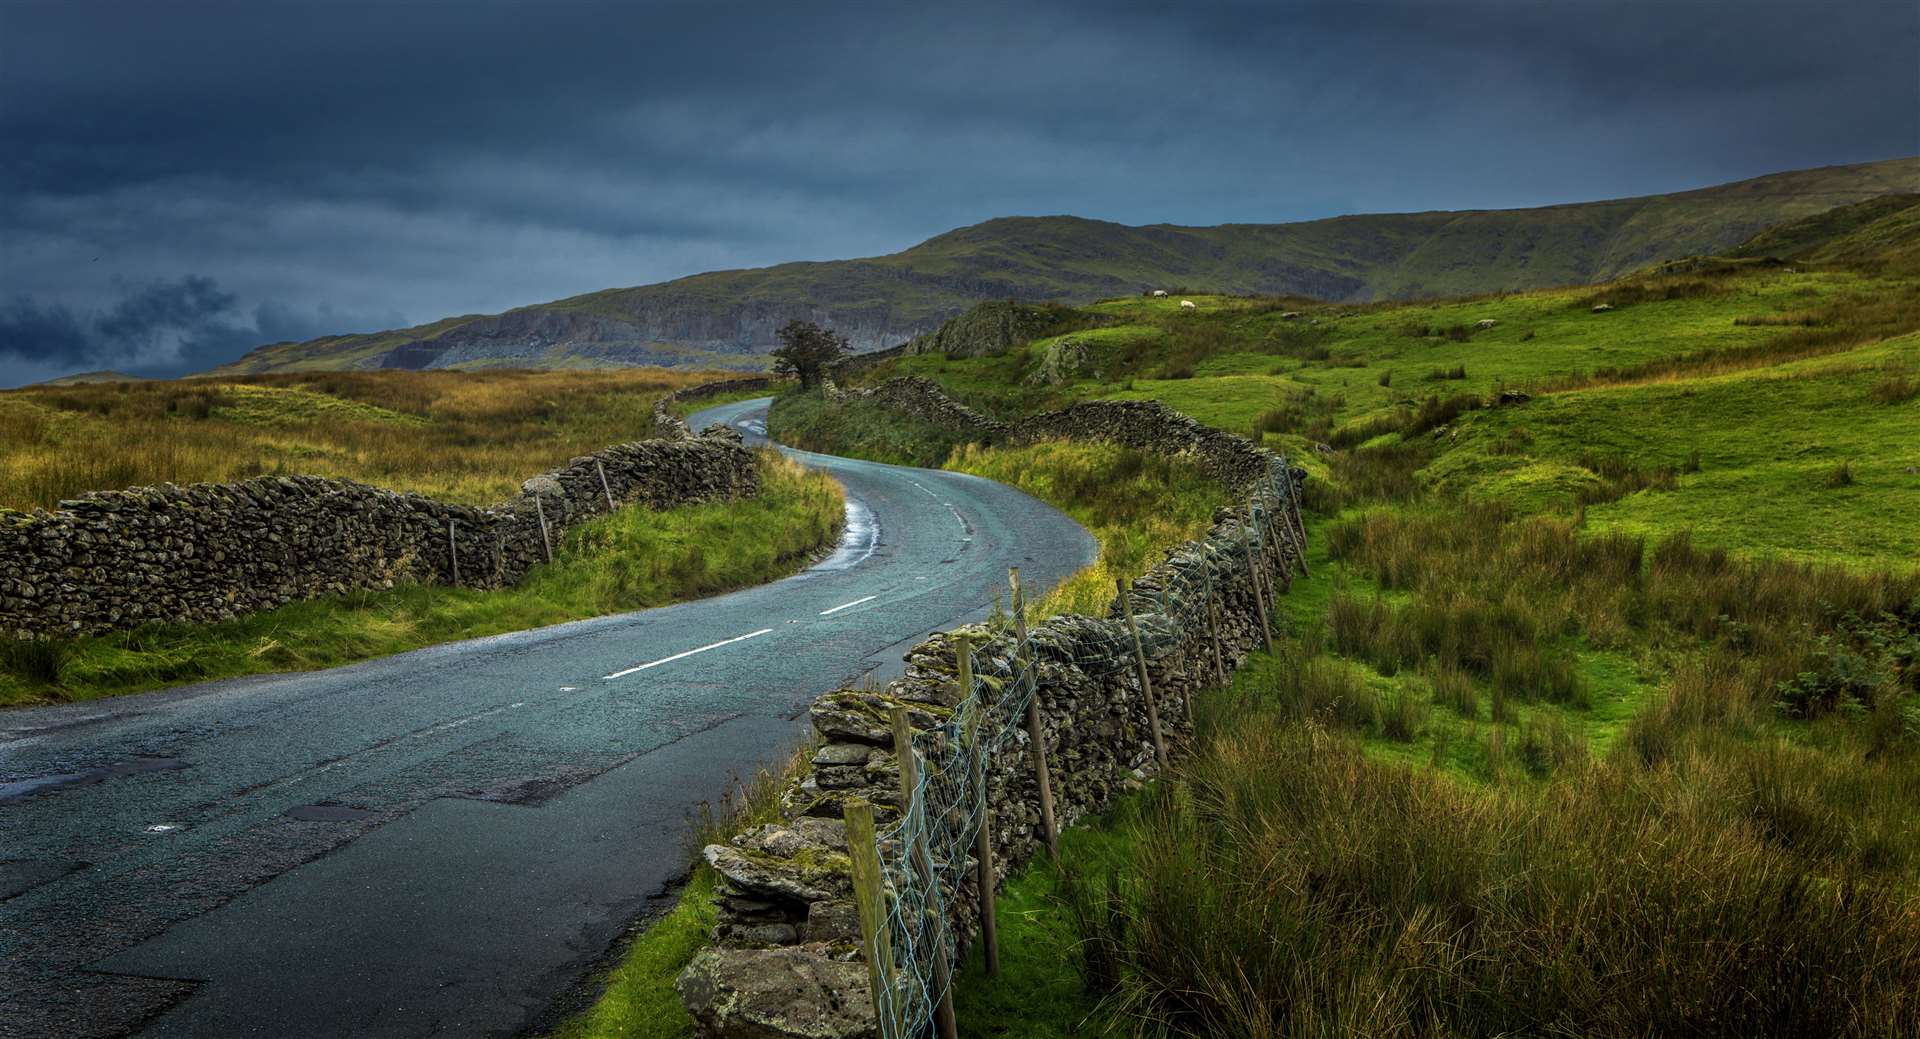 The Yorkshire Moors. Image from iStock and Lorado